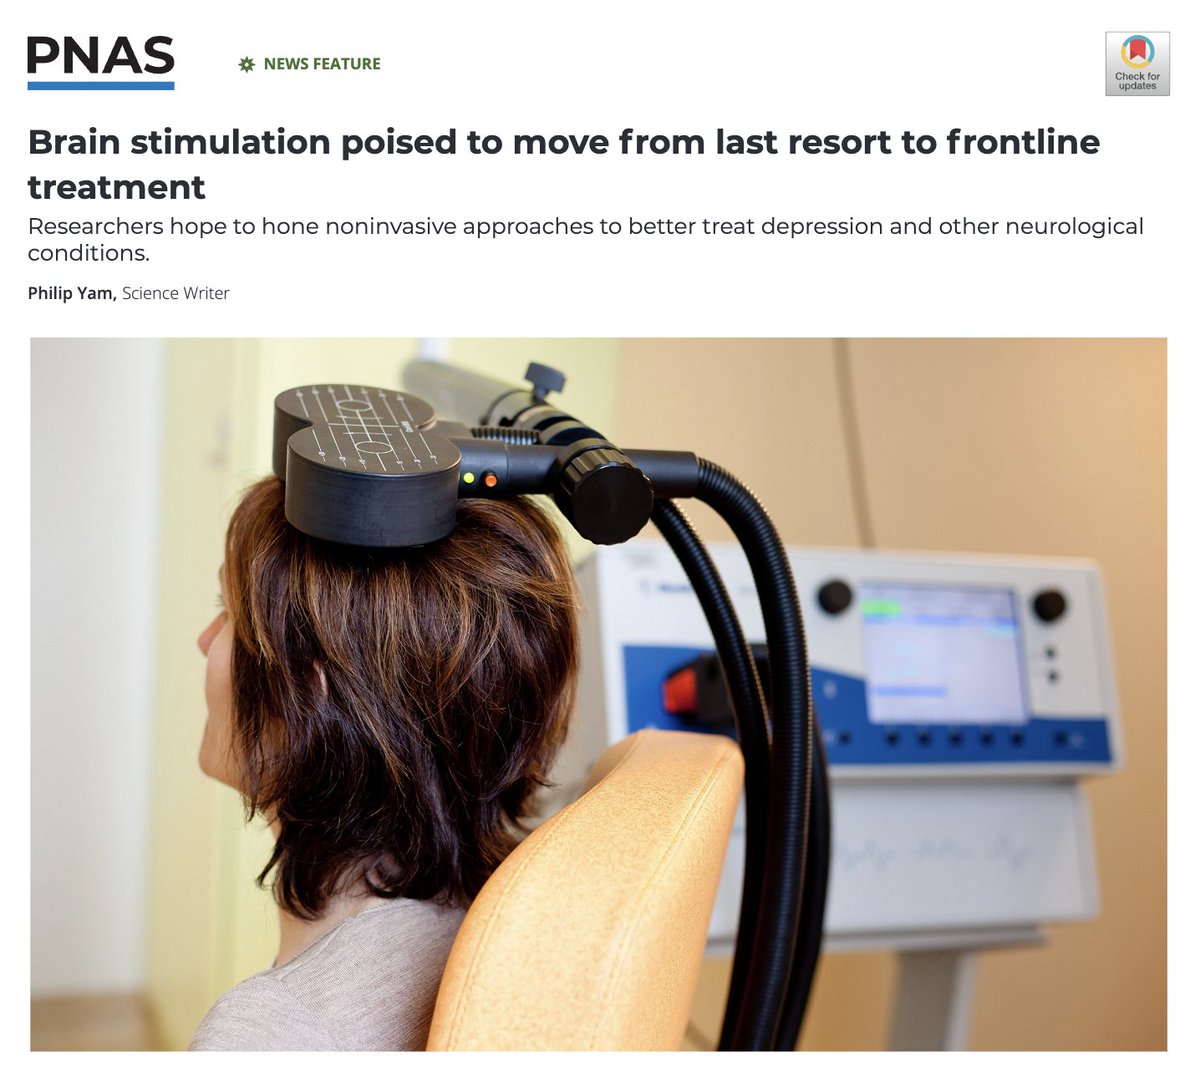 “The most critical advance for generating faster res­ponses to #TMS and extending remission periods is precision targeting.'
Read full article: pnas.org/doi/epdf/10.10…

@PNASNews @NolanRyWilliams #MDD #severedepression #majordepressivedisorder